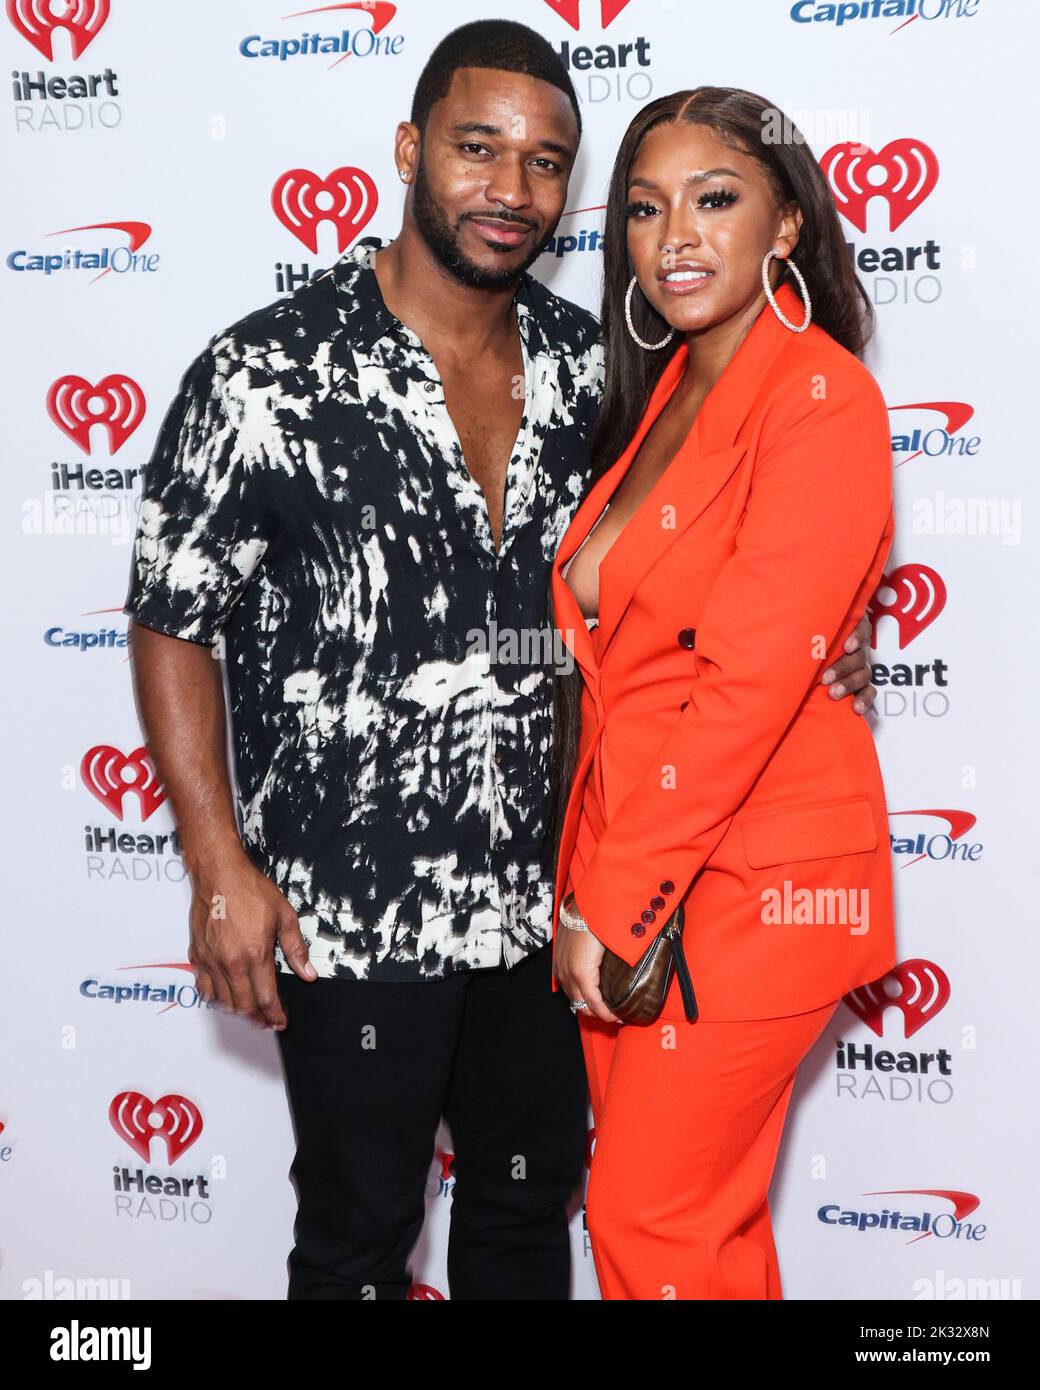 LAS VEGAS, NEVADA, USA - SEPTEMBER 23: Ralph Pittman and Drew Sidora pose in the press room at the 2022 iHeartRadio Music Festival - Night 1 held at the T-Mobile Arena on September 23, 2022 in Las Vegas, Nevada, United States. (Photo by Xavier Collin/Image Press Agency) Stock Photo